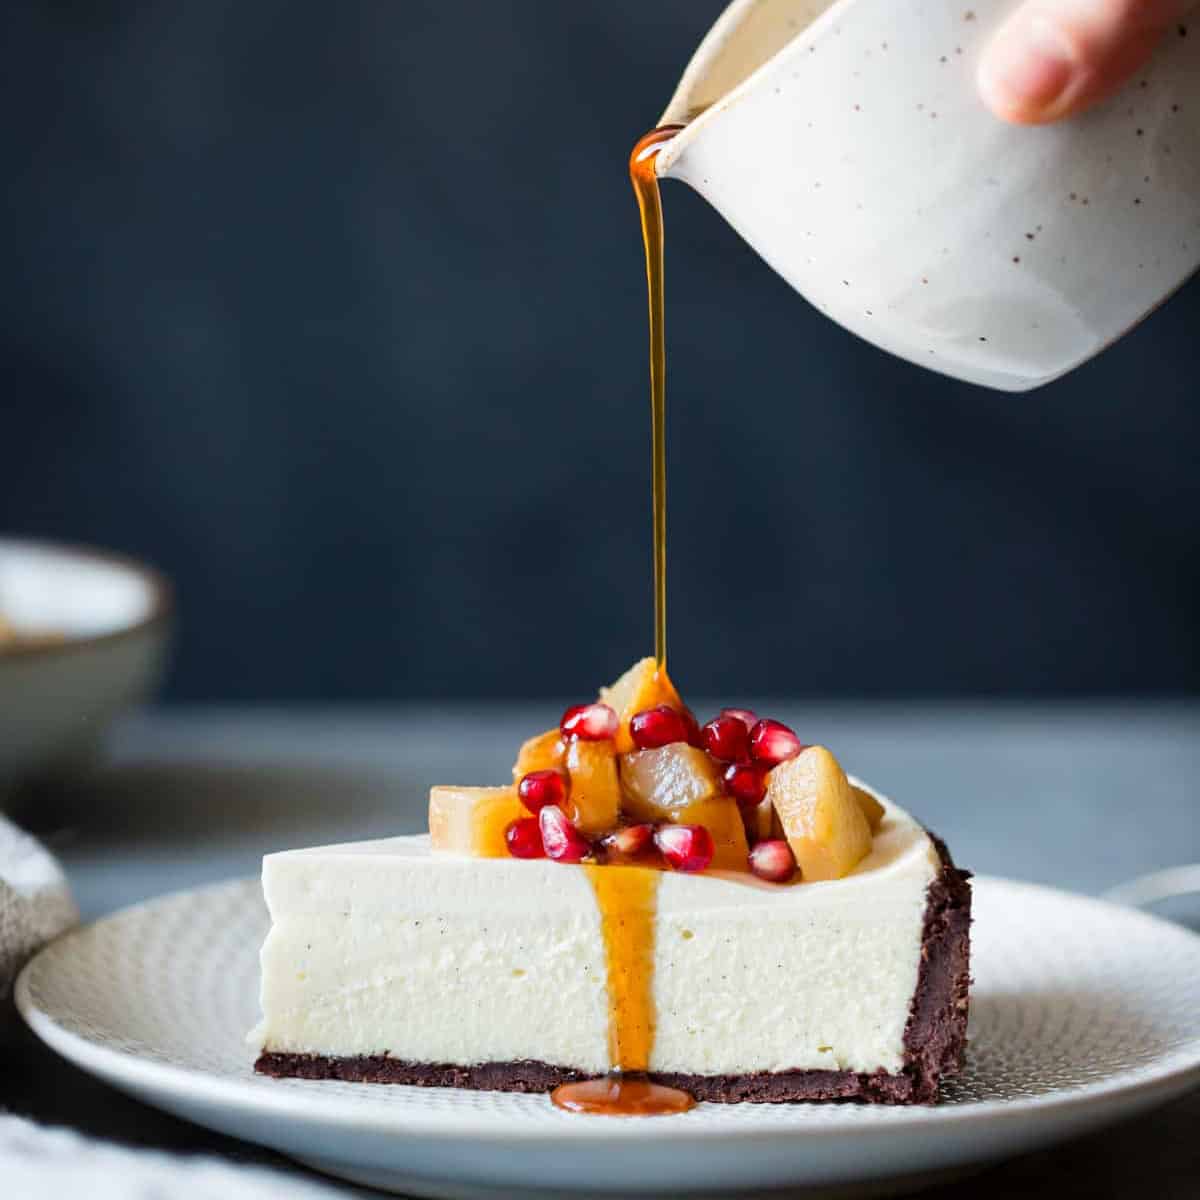 Chocolate Crust Cheesecake with Pears and Pomegranates